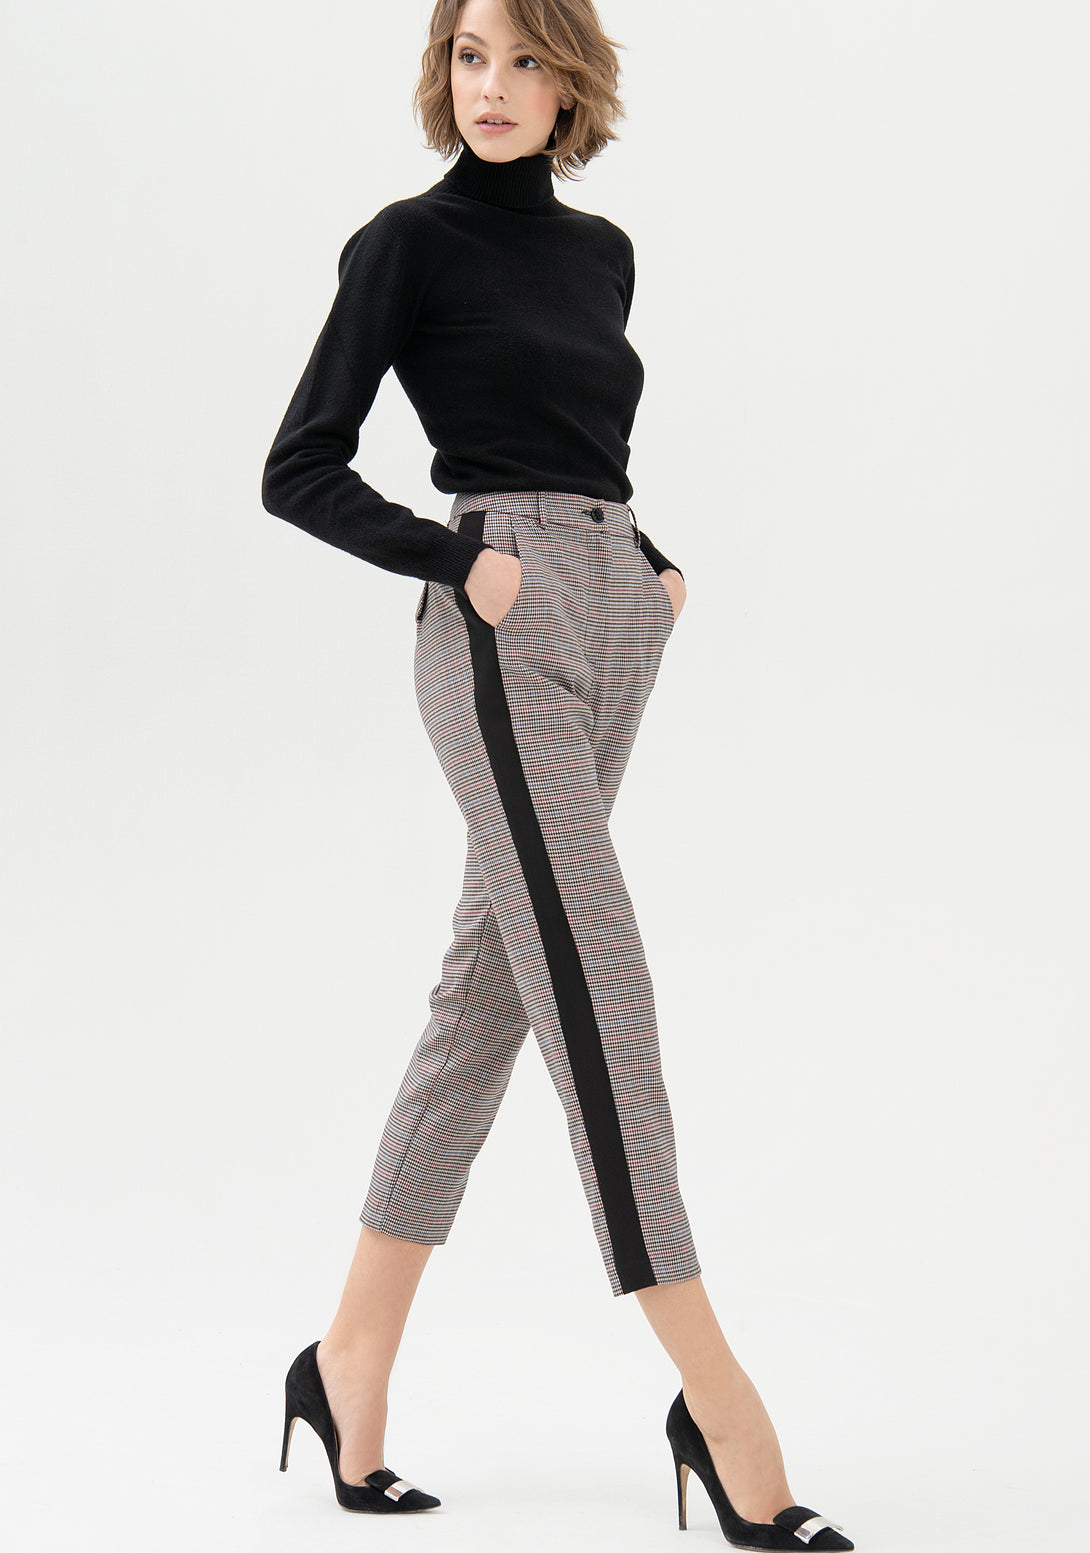 Straight leg pant made in pied de poule fabric